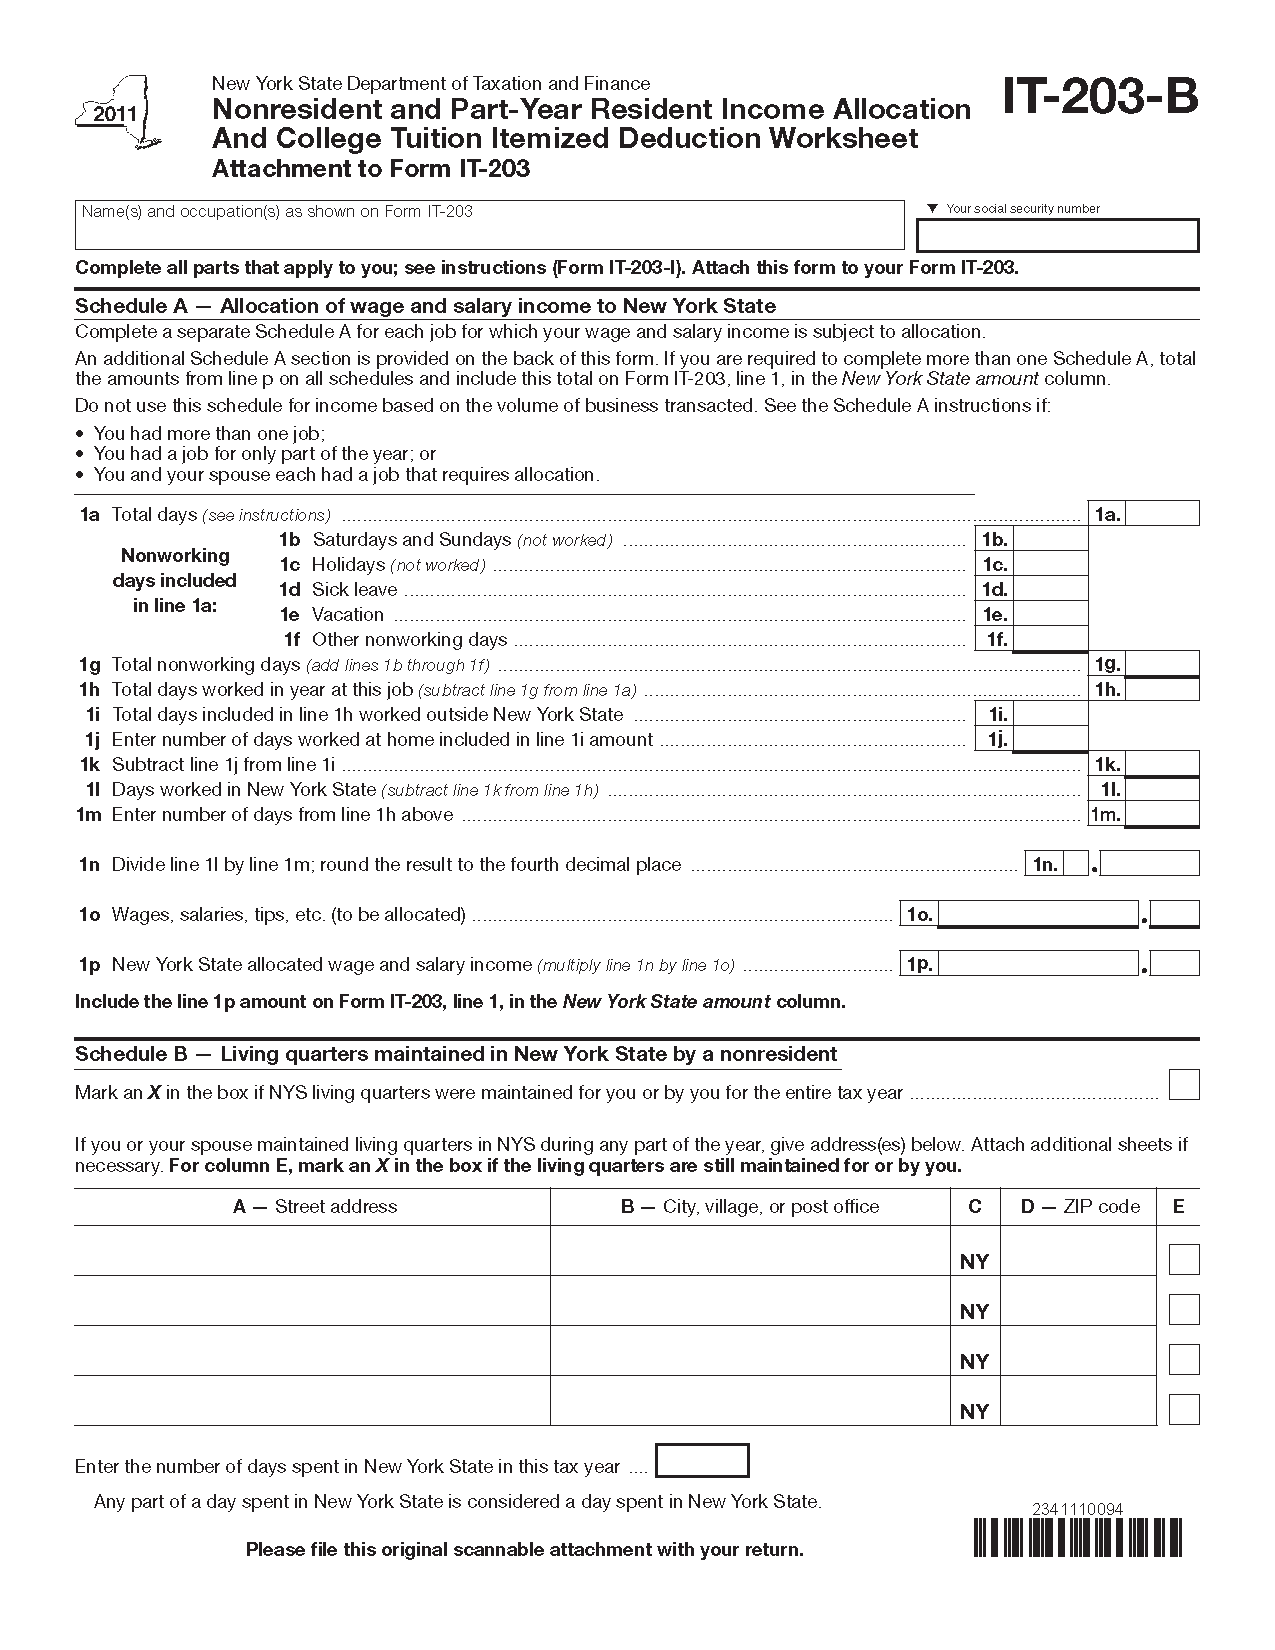 New York Part Year Resident Tax Form